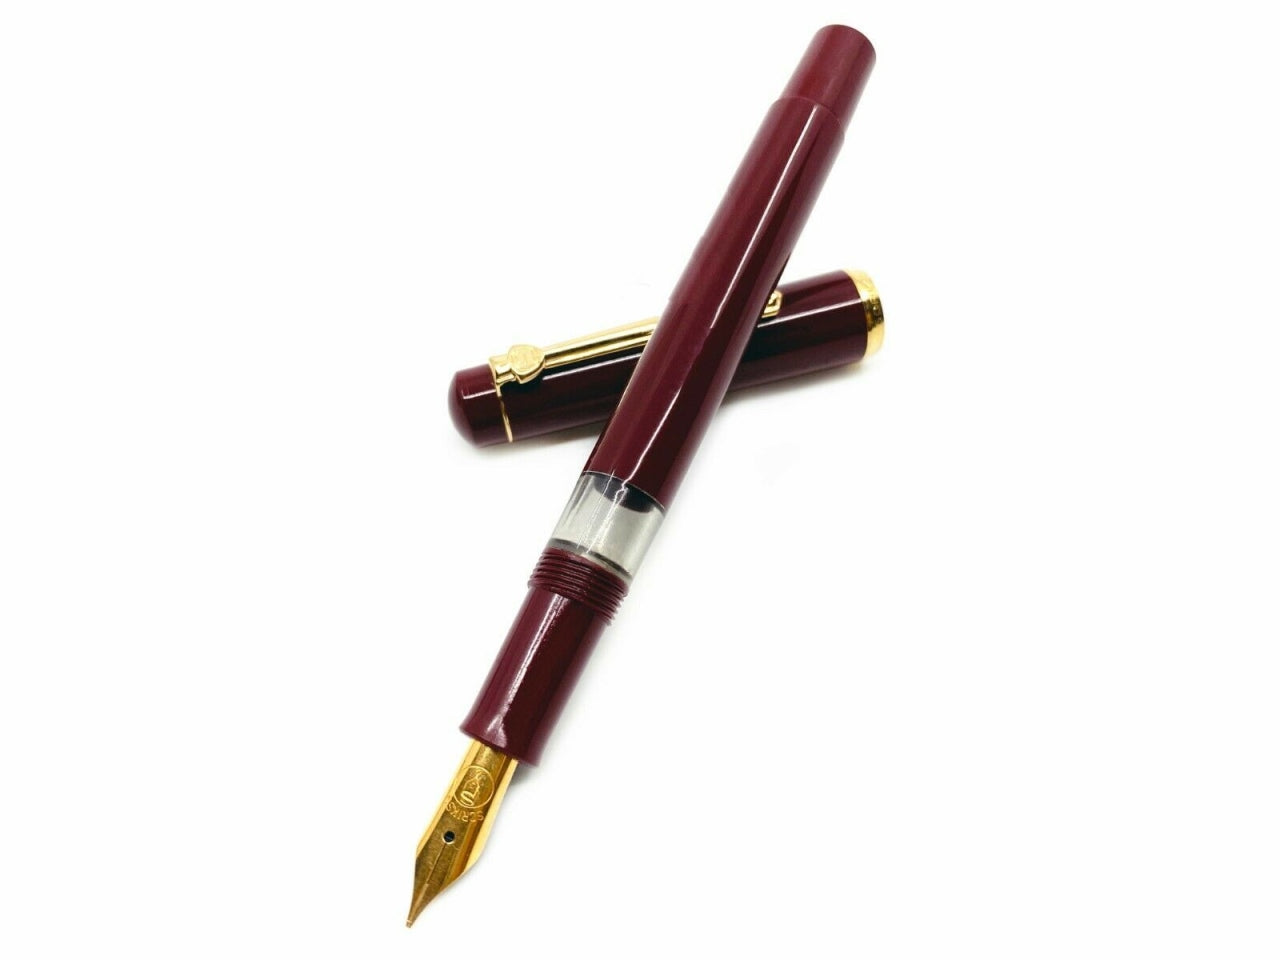 Scrikss Legendary 419 Classic Fountain Pen with Piston Ink Filling System, Gold Plated Iridium Nib, Gold Plated - Ring, Clip, Nozzle And Scratch Resistant Acrylic Burgundy Barrel